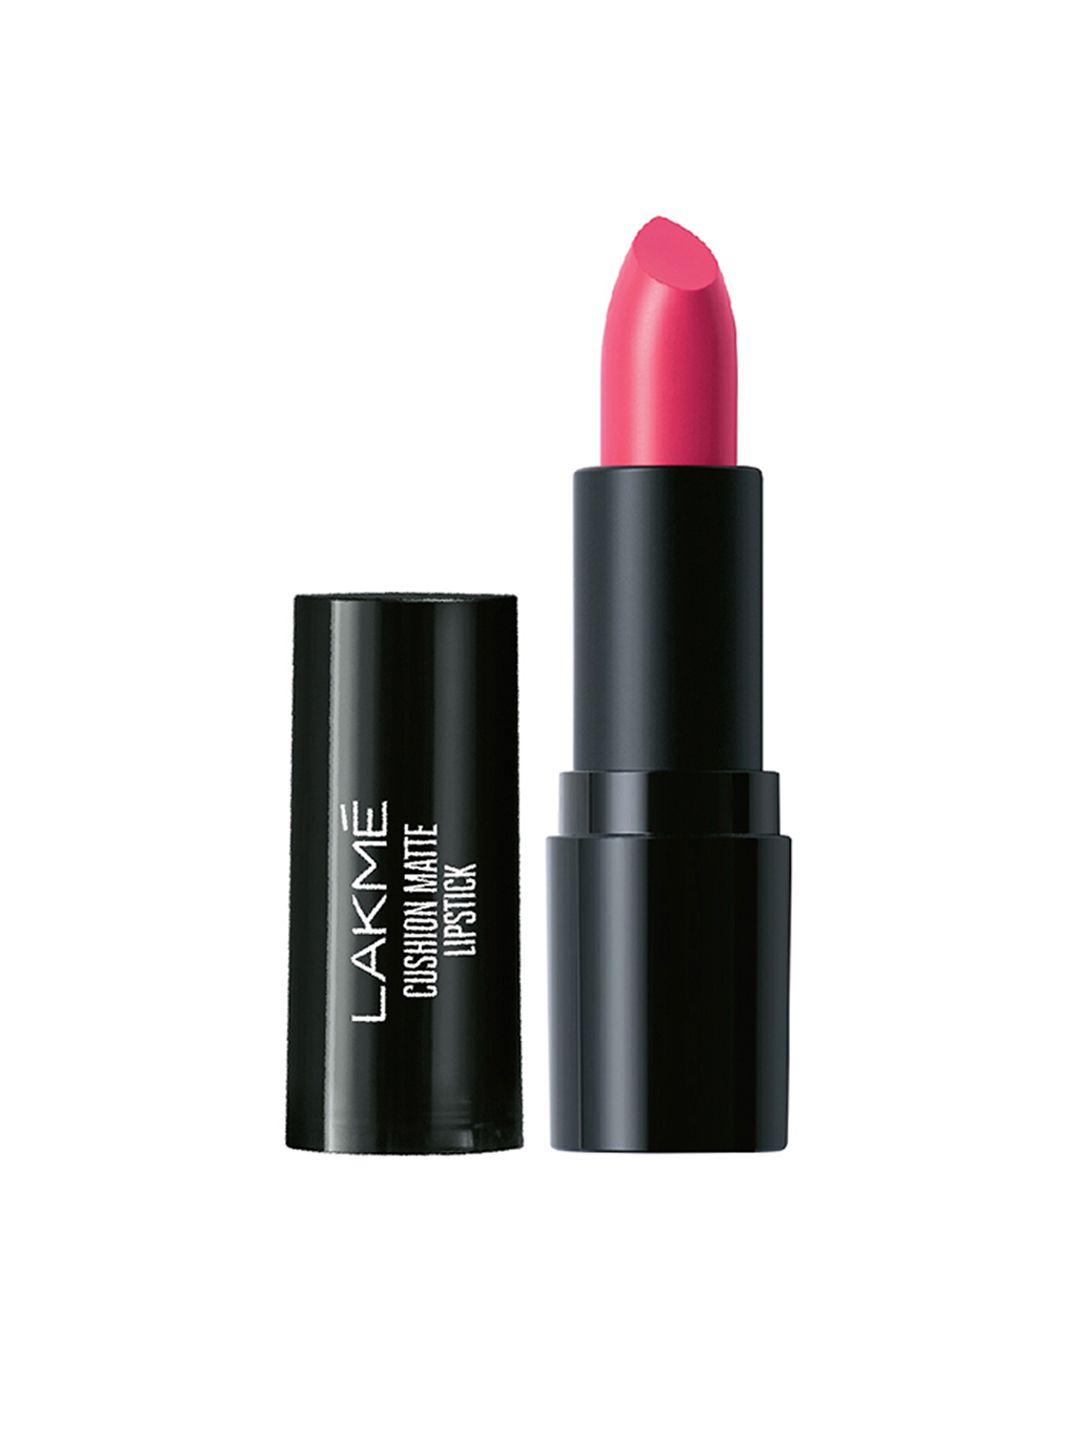 Lakme Cushion Matte Lipstick with French Rose Oil - Pink Prom CP2 Price in India